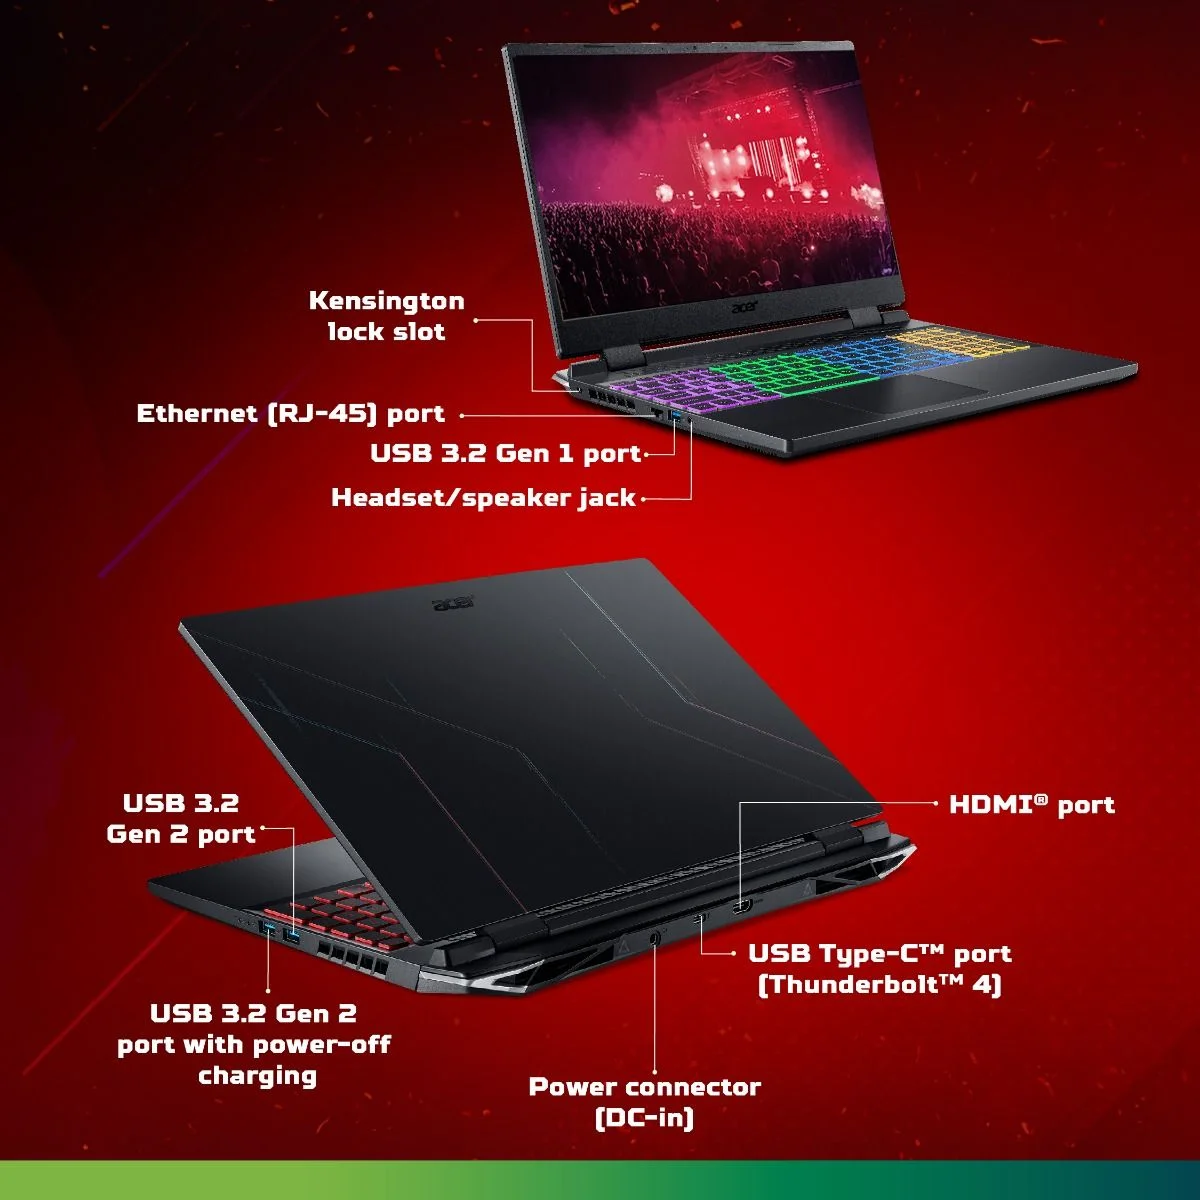 ACER NITRO 5 AMD Ports Aplenty Plug all your peripherals into the full range of ports, including HDMI 2.1, the new, powerful USB4™, and the latest USB 3.2 standard with Gen1 and 2 support.